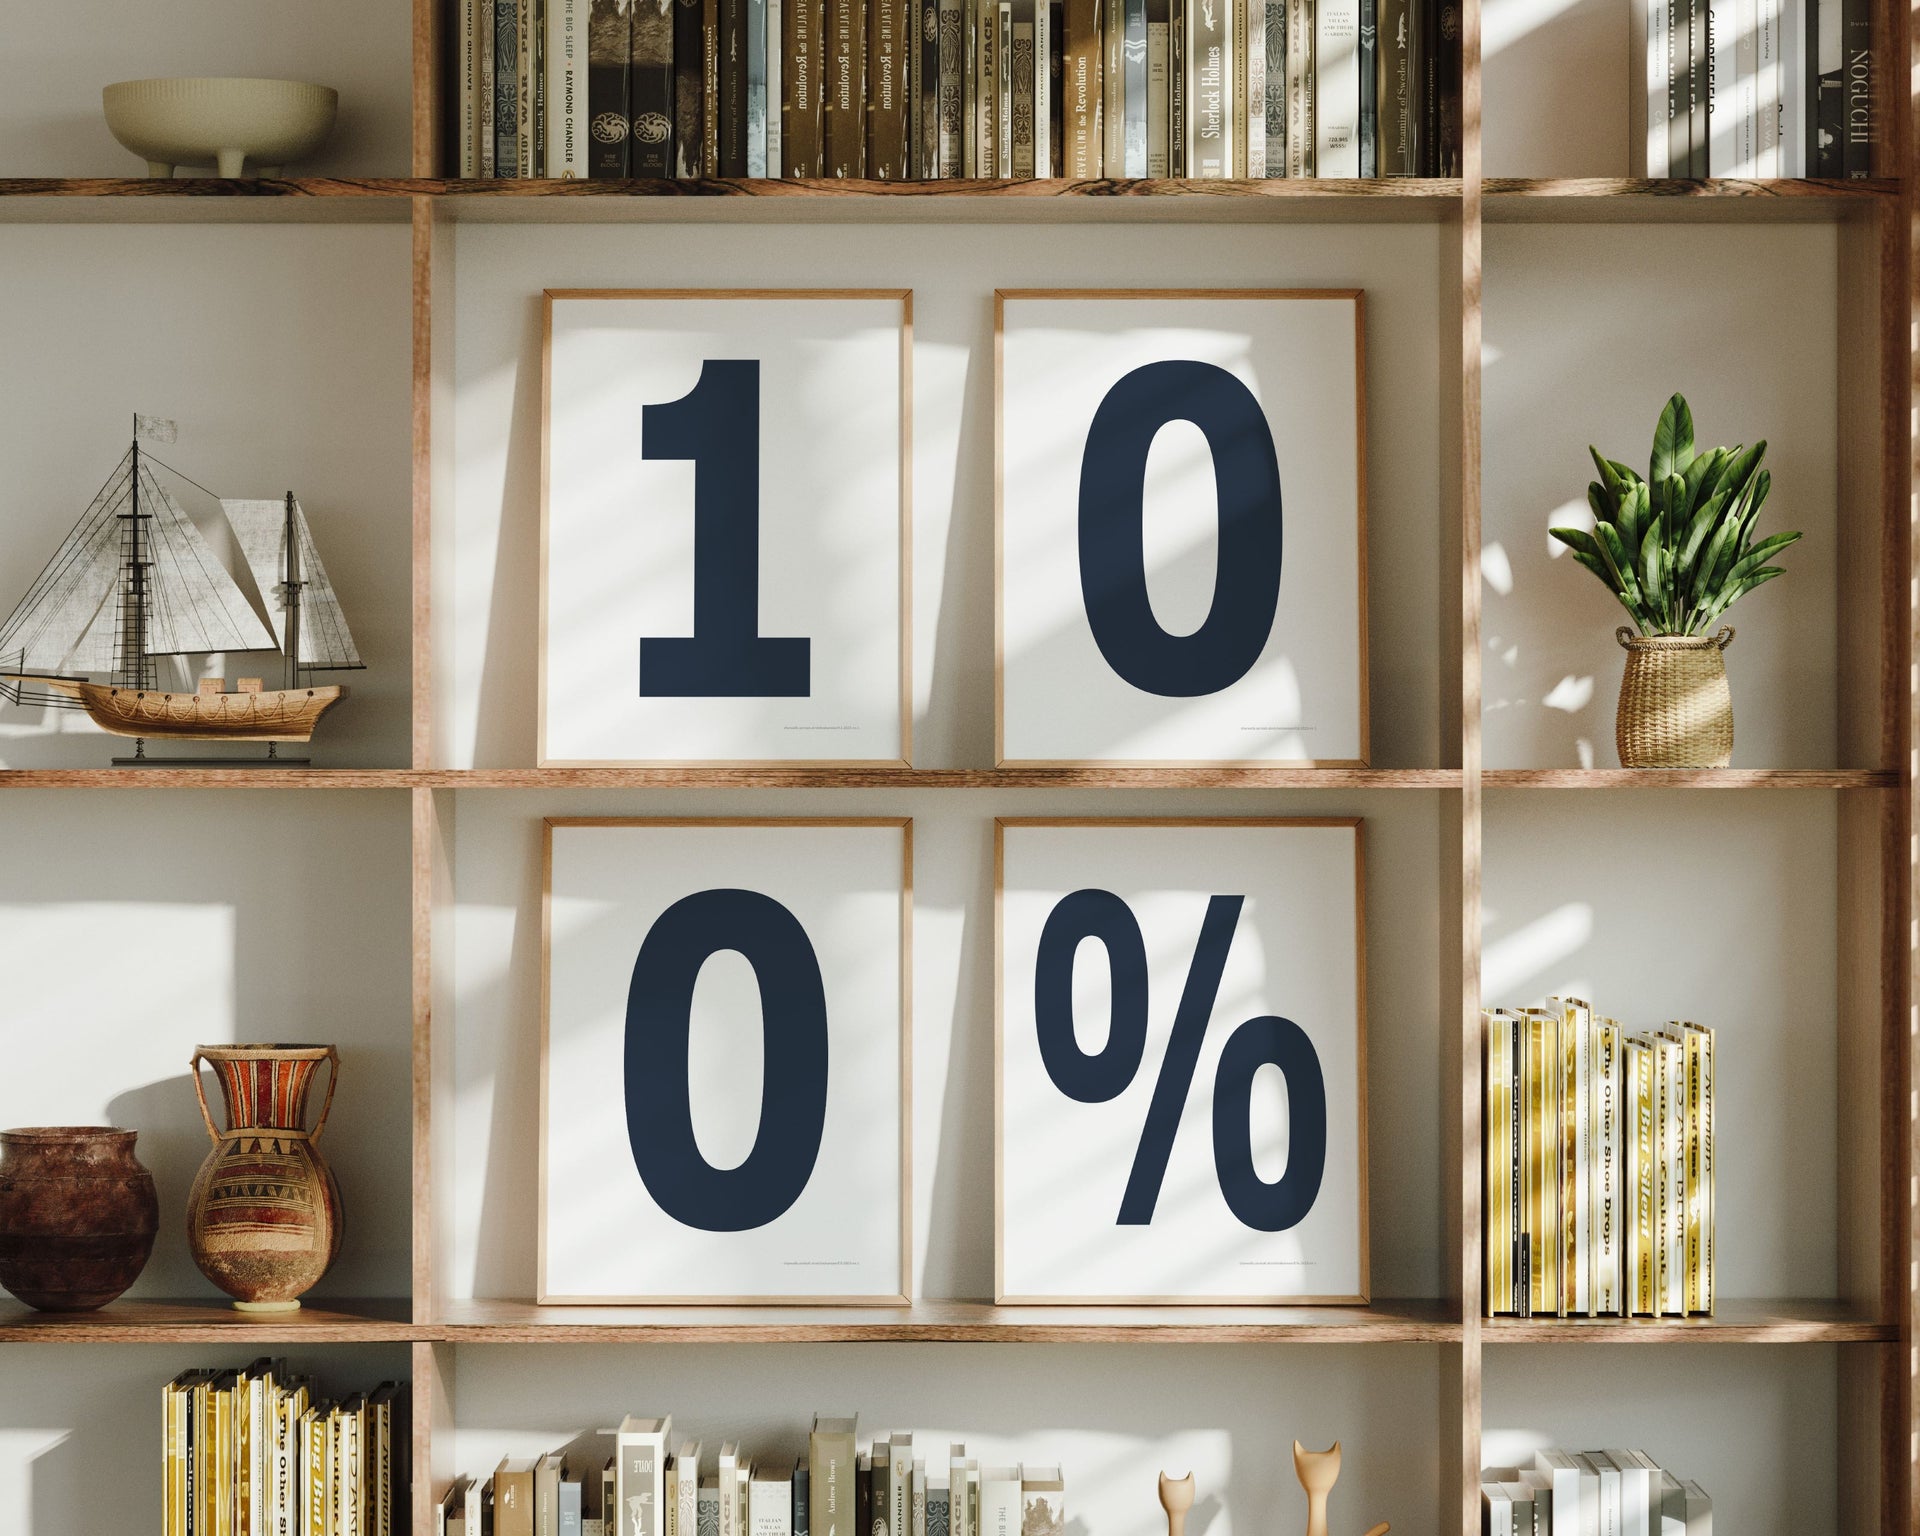 Four framed number and percent sign art prints spelling out 100% on a boho bookshelf.